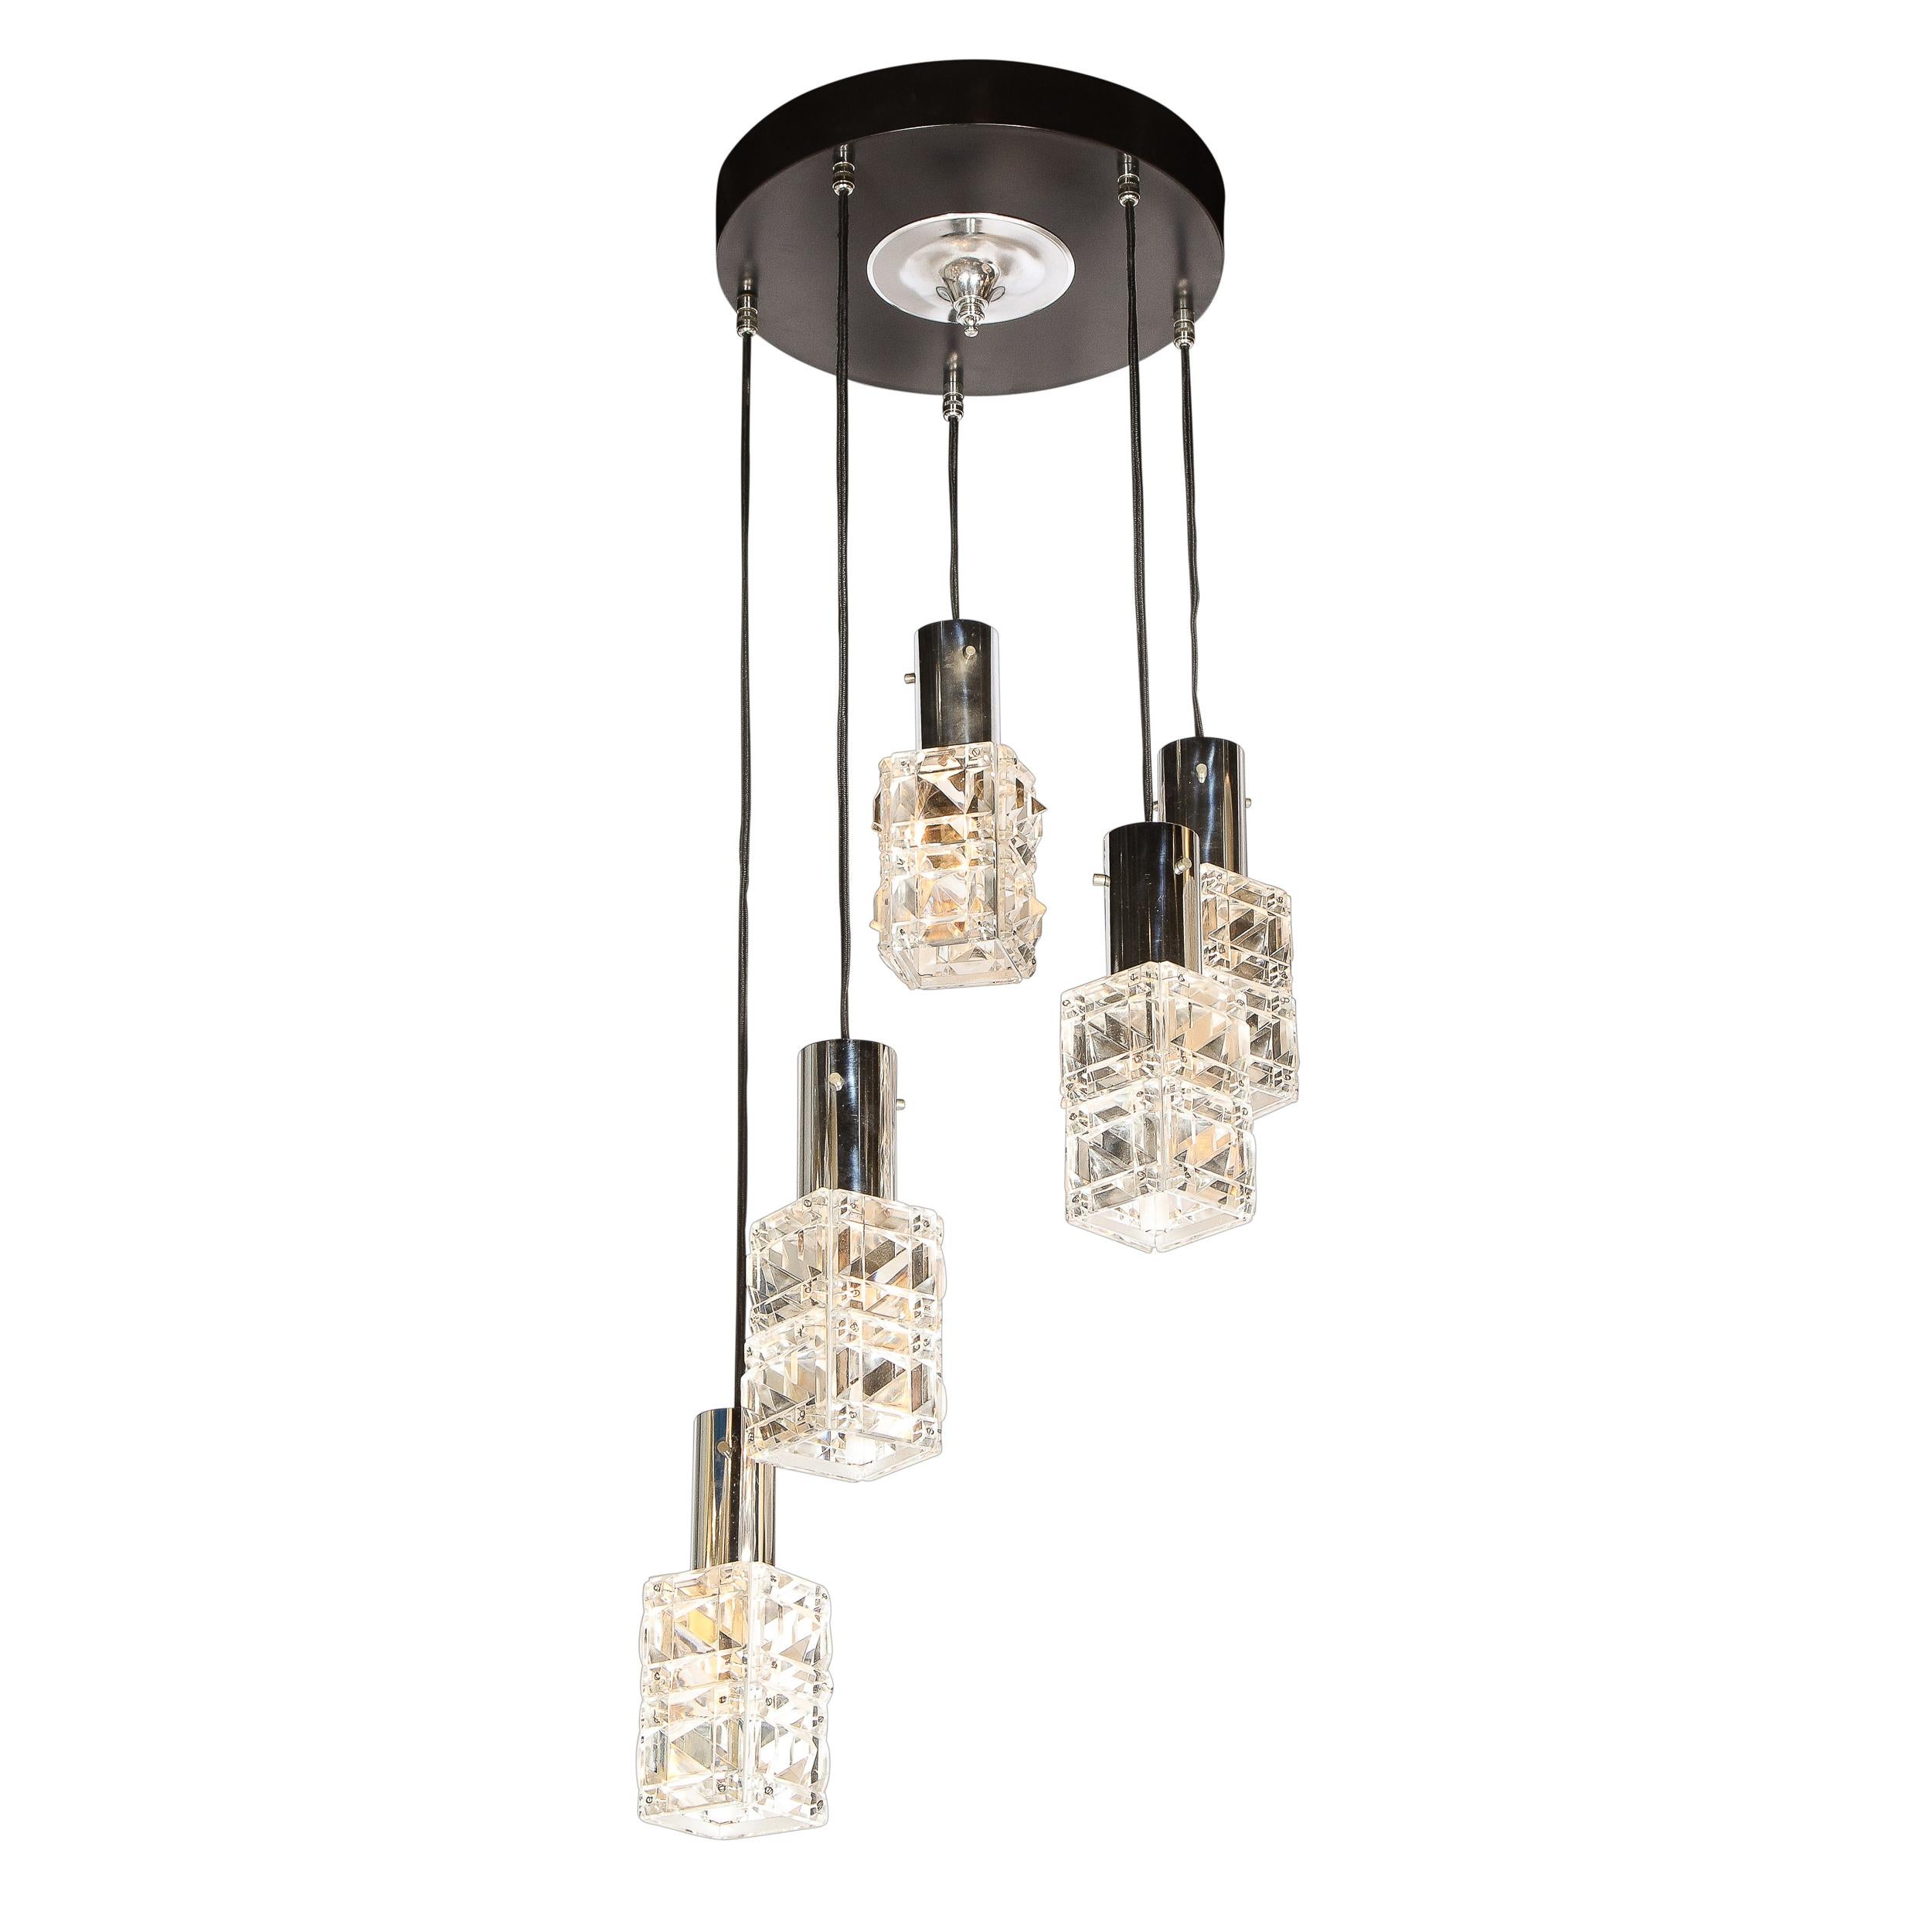 This stunning Mid-Century Modern chandelier was realized in Austria circa 1970 by the esteemed studio of Kinkeldey. It features a circular canopy in black enamel with polished chrome center five staggered shades hang via black silk cord. The shades